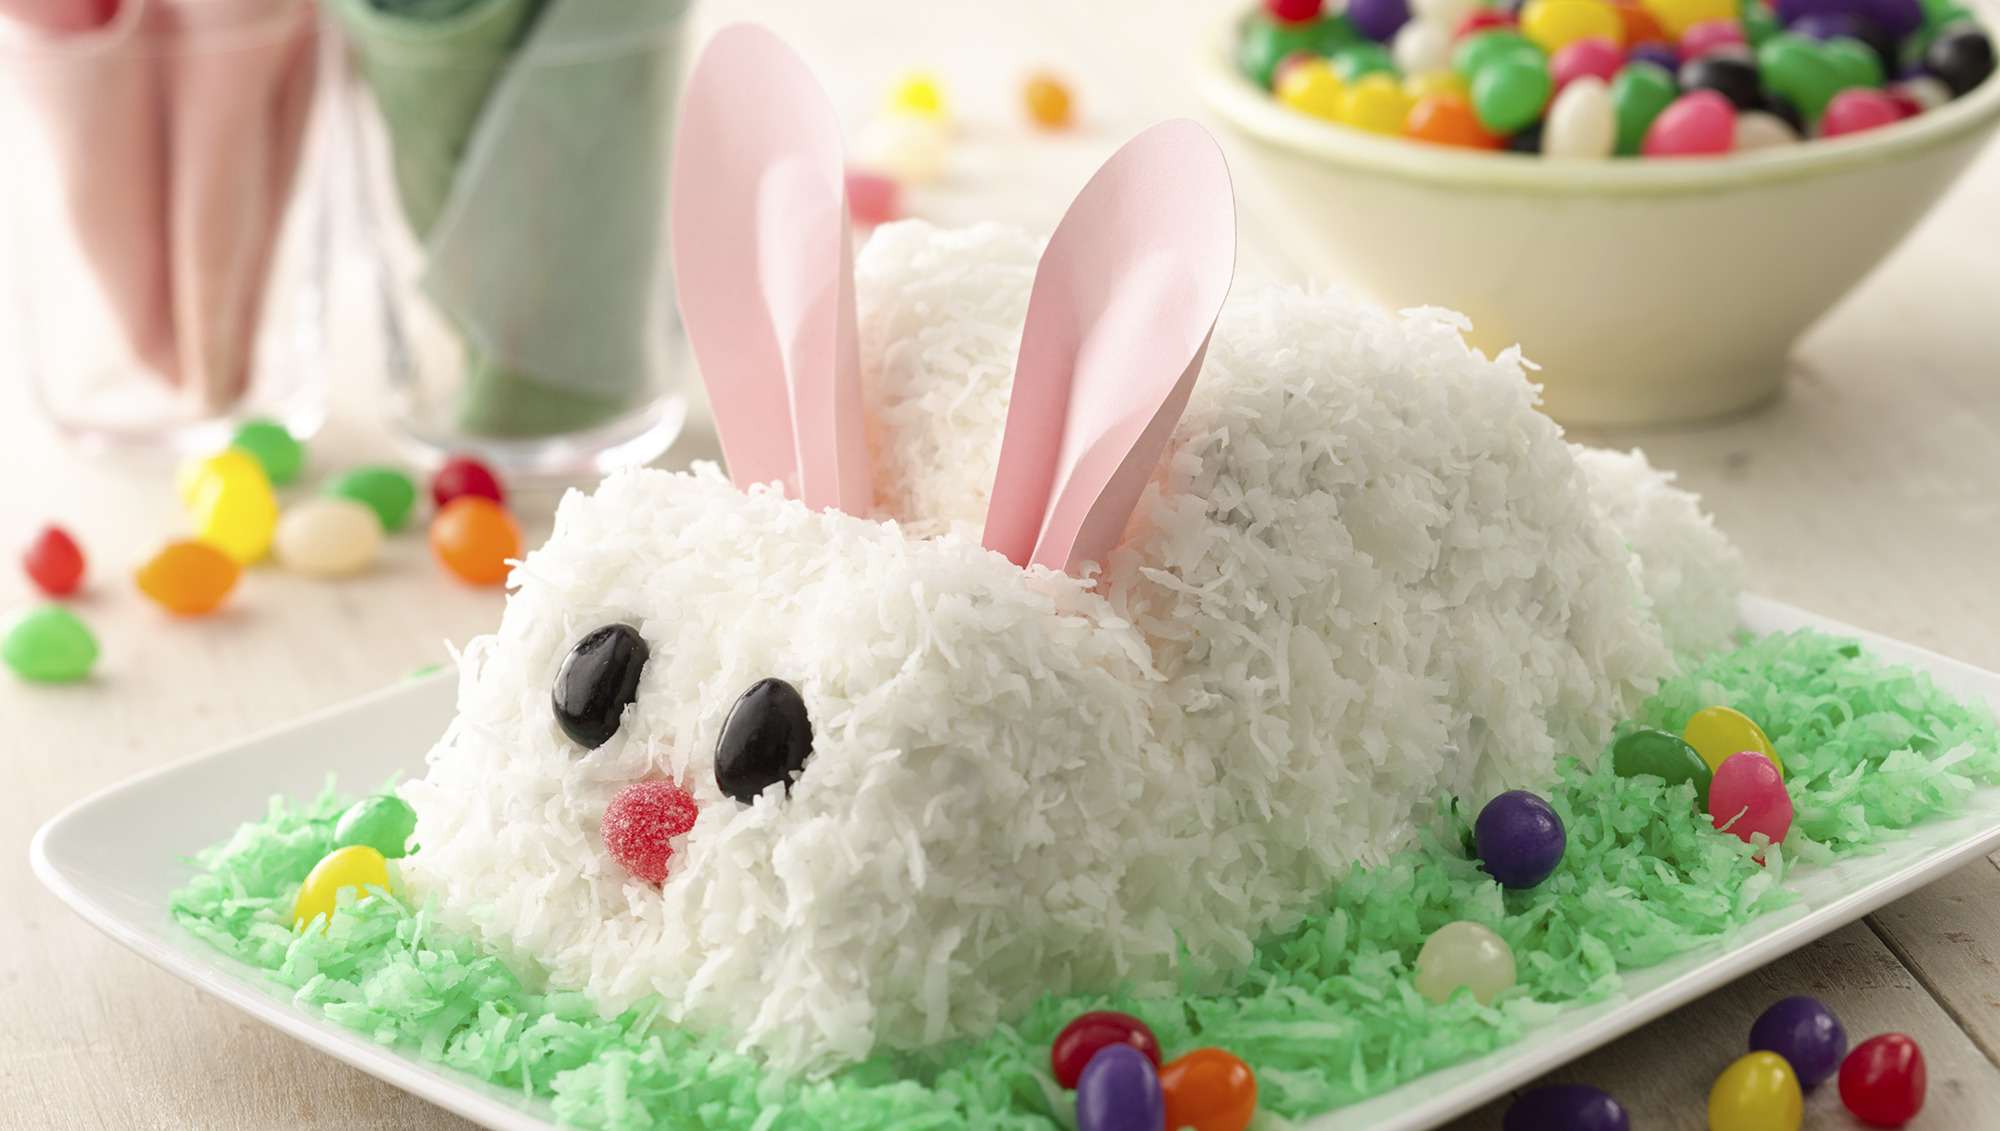 Amazon.com: Bunny Cake Topper with Ear Foot Flowers Eye Nose for Bunny  Rabbit Baby Shower and Easter : Grocery & Gourmet Food